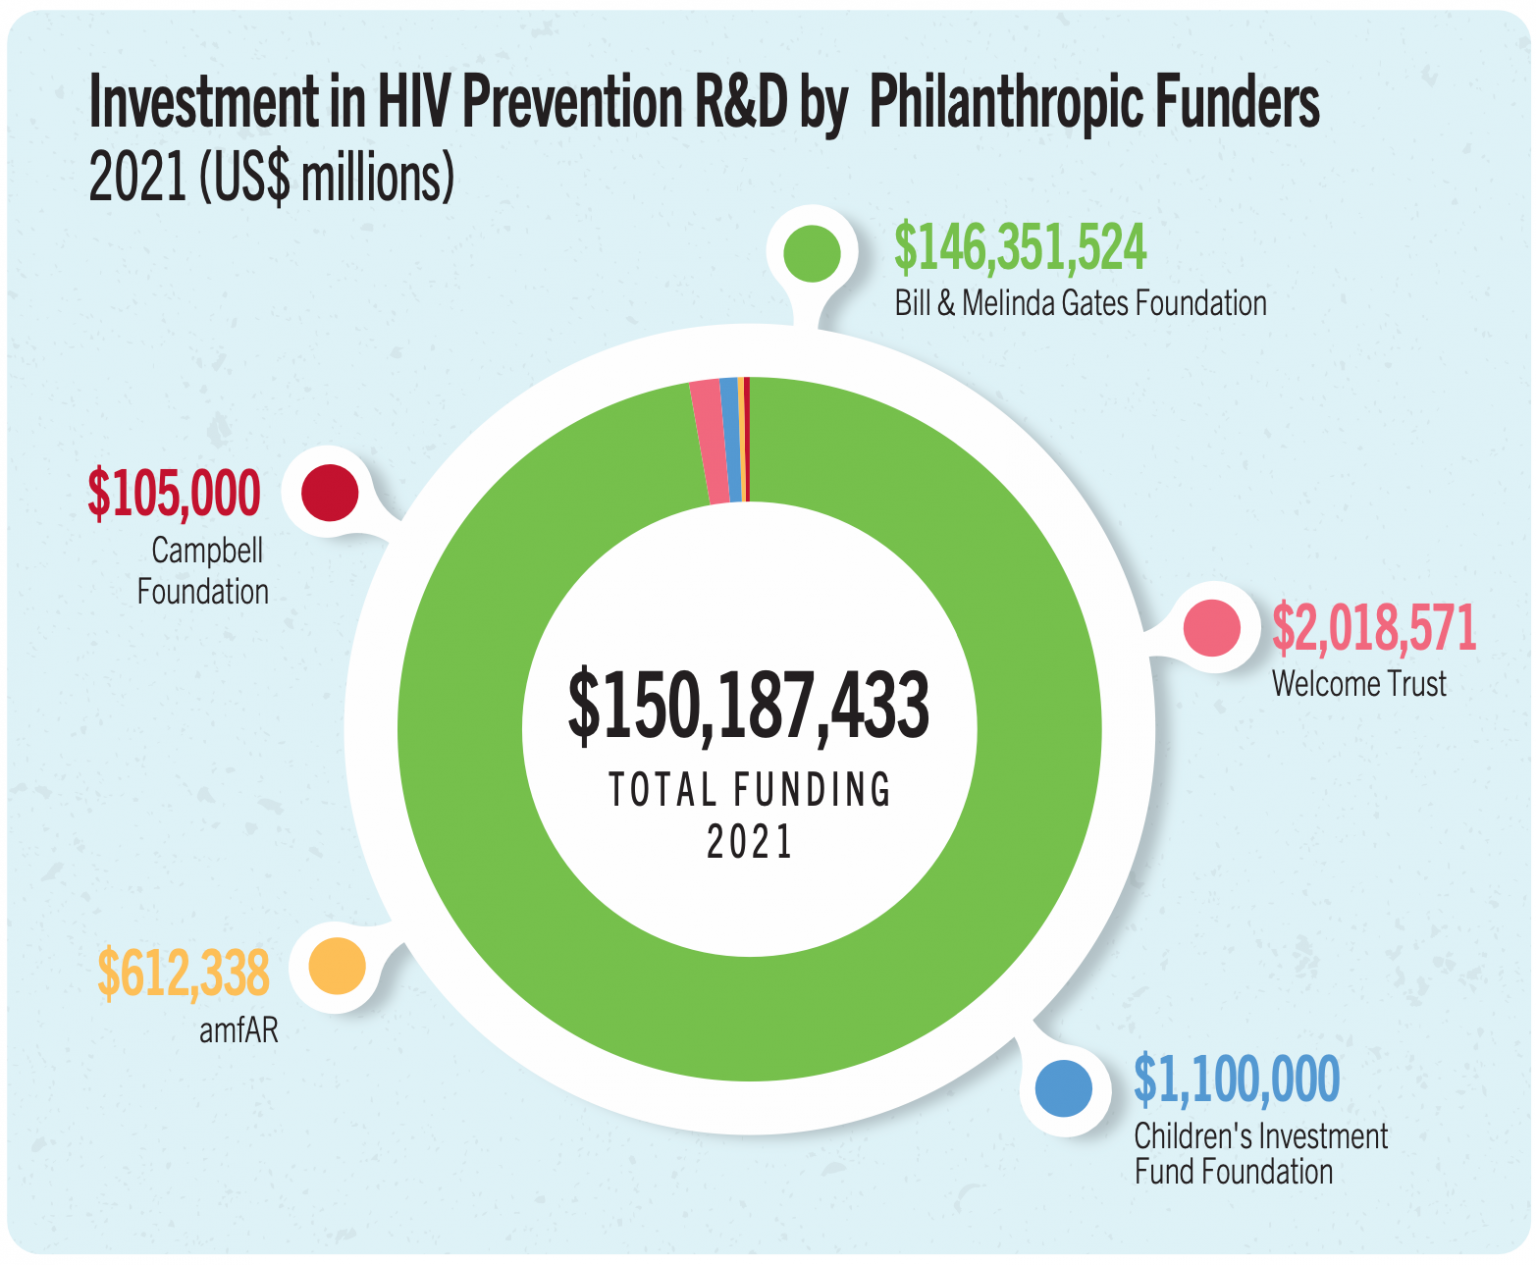 investment by philanthropic funders